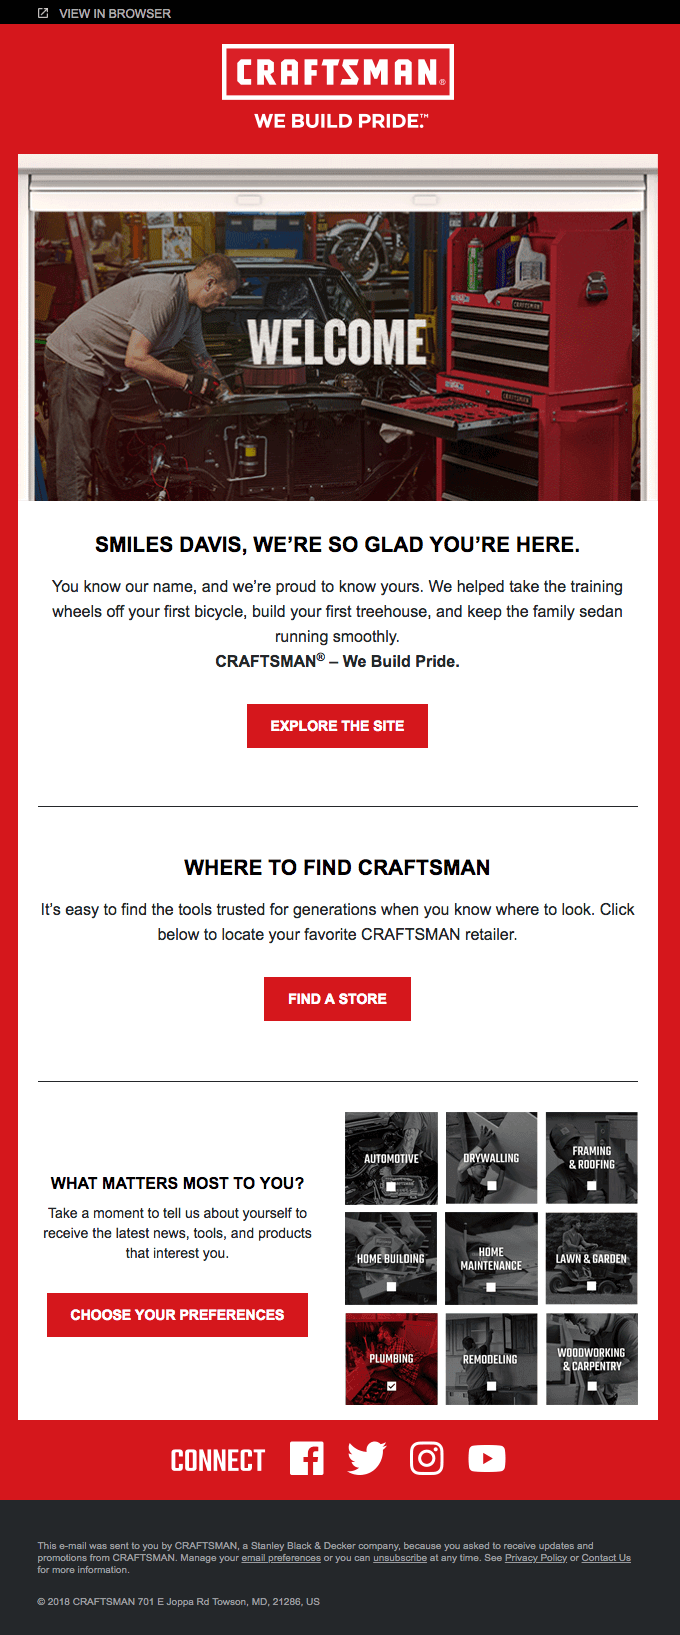 personalized email example